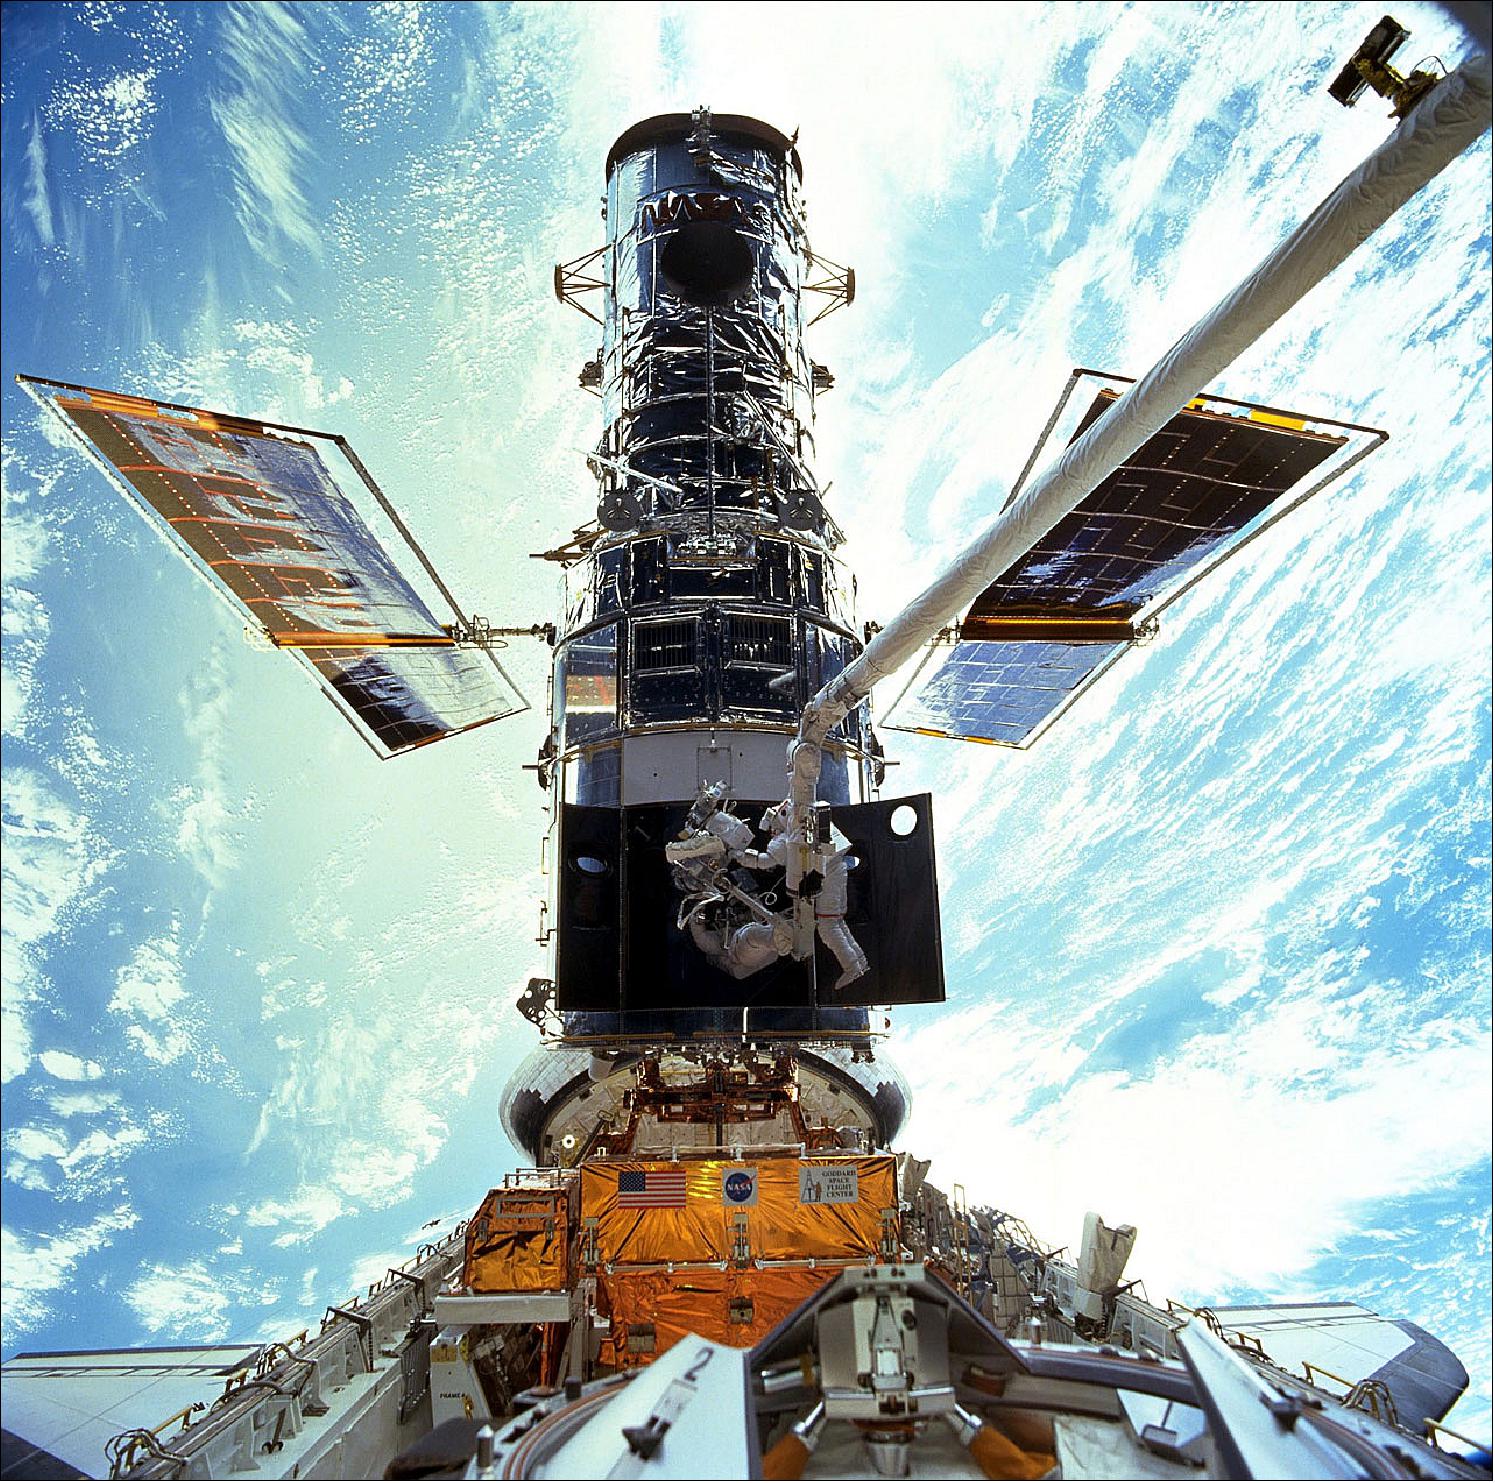 Figure 59: Hubble berthed in the Space Shuttle bay during Servicing Mission 3A. Astronauts Steven L. Smith, and John M. Grunsfeld, appear as small figures in this wide scene photographed during EVA (Extravehicular Activity), image credit: NASA/ESA